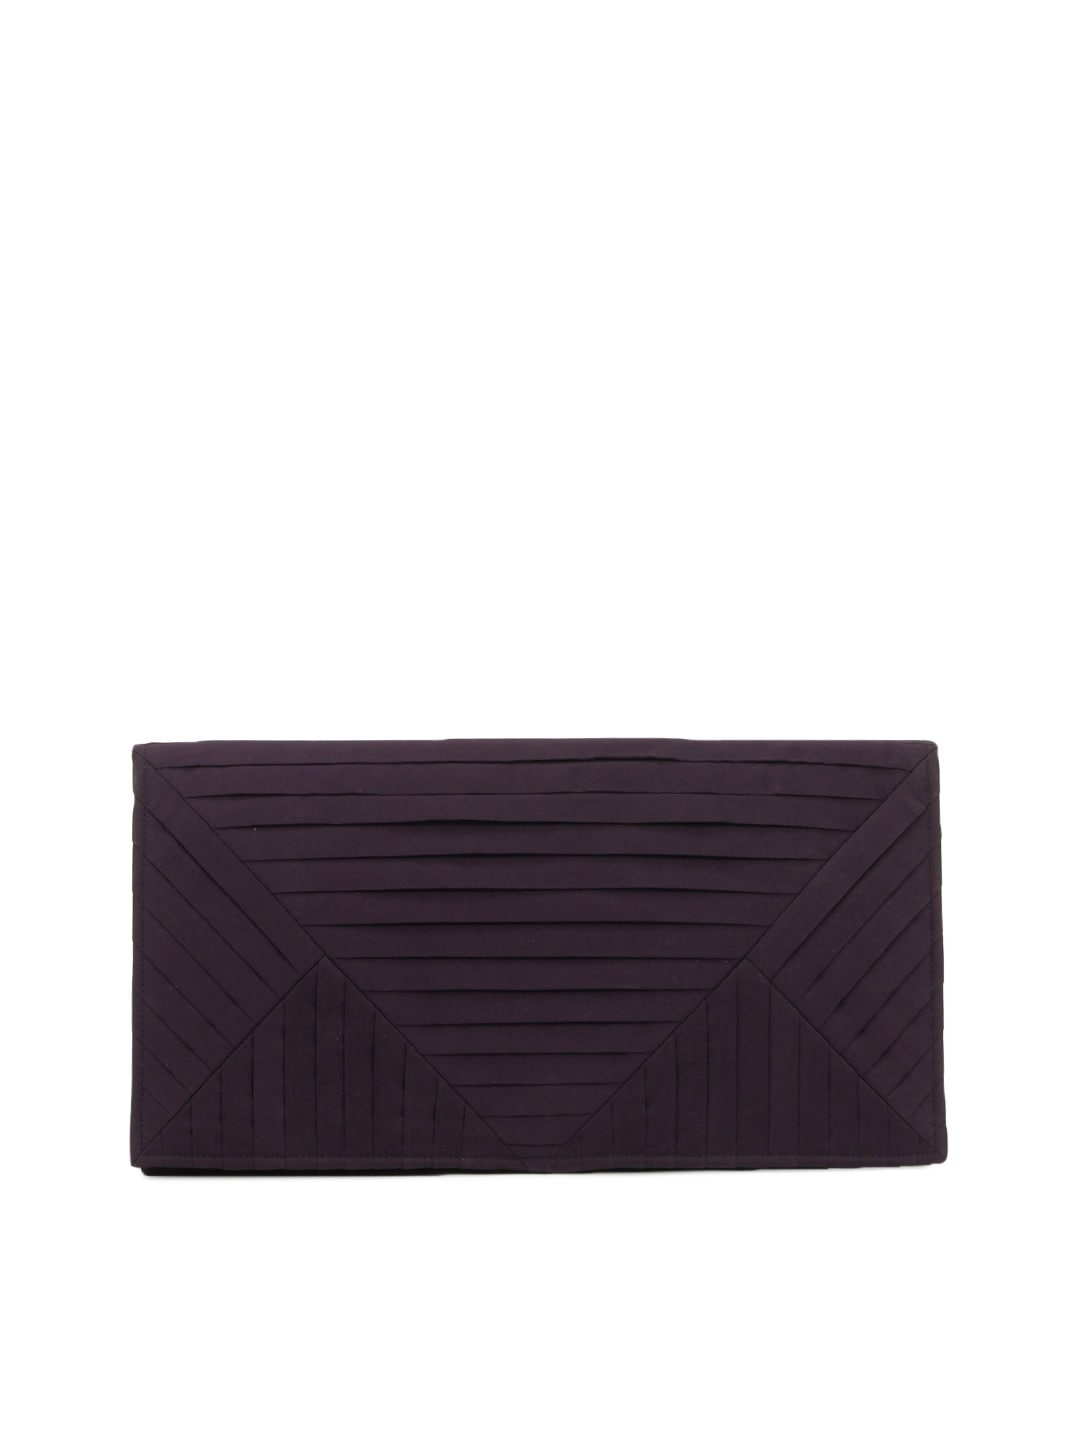 French Connection Women Purple Clutch